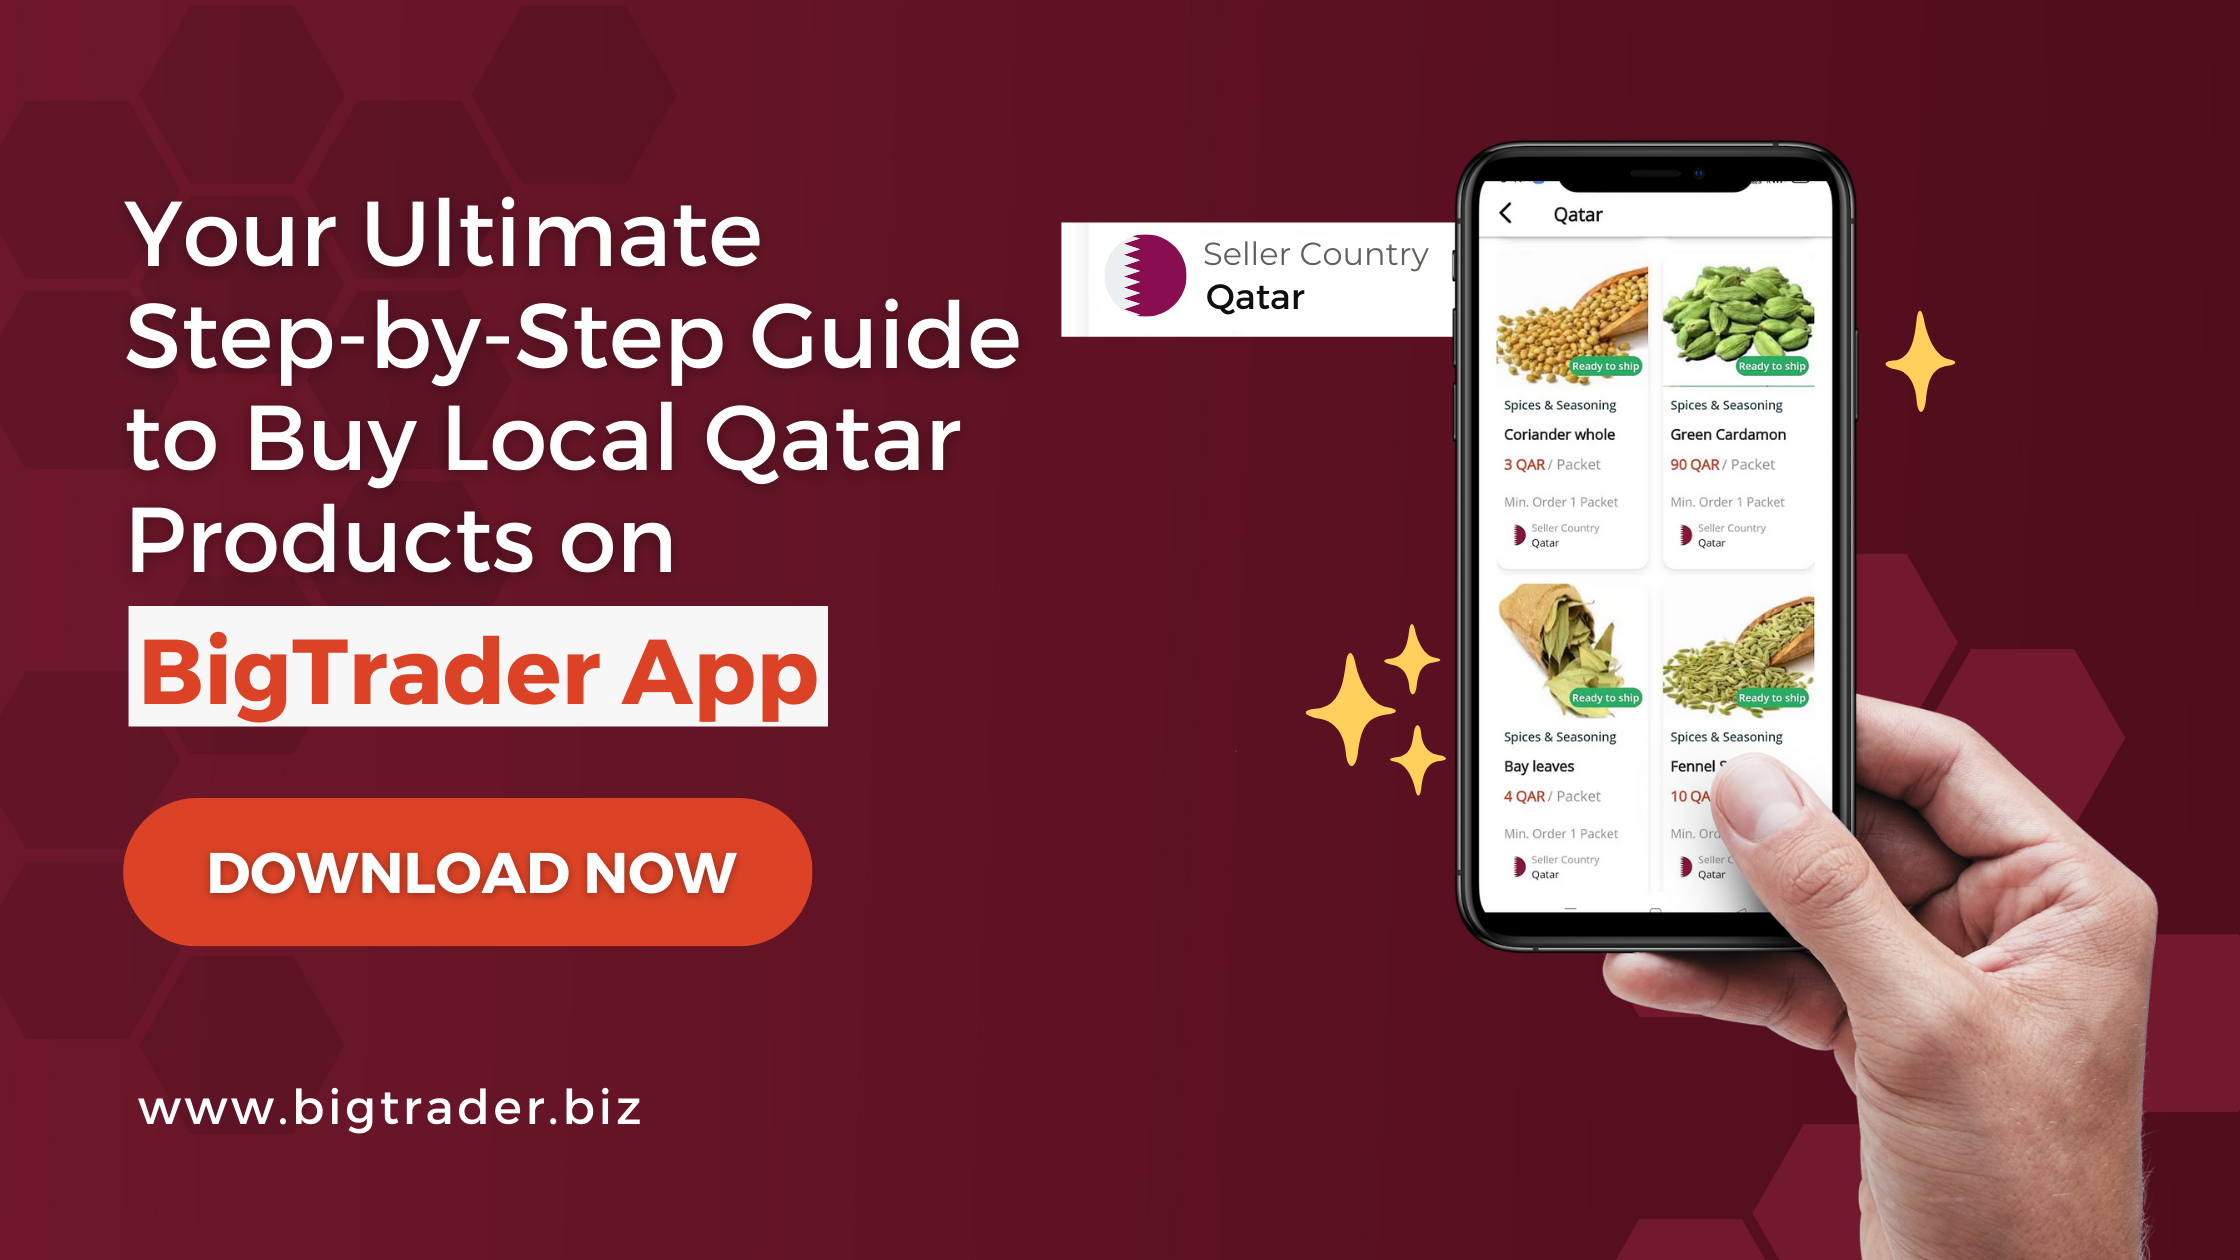 Your Ultimate Step-by-Step Guide to Buy Local Qatar Products on BigTrader App